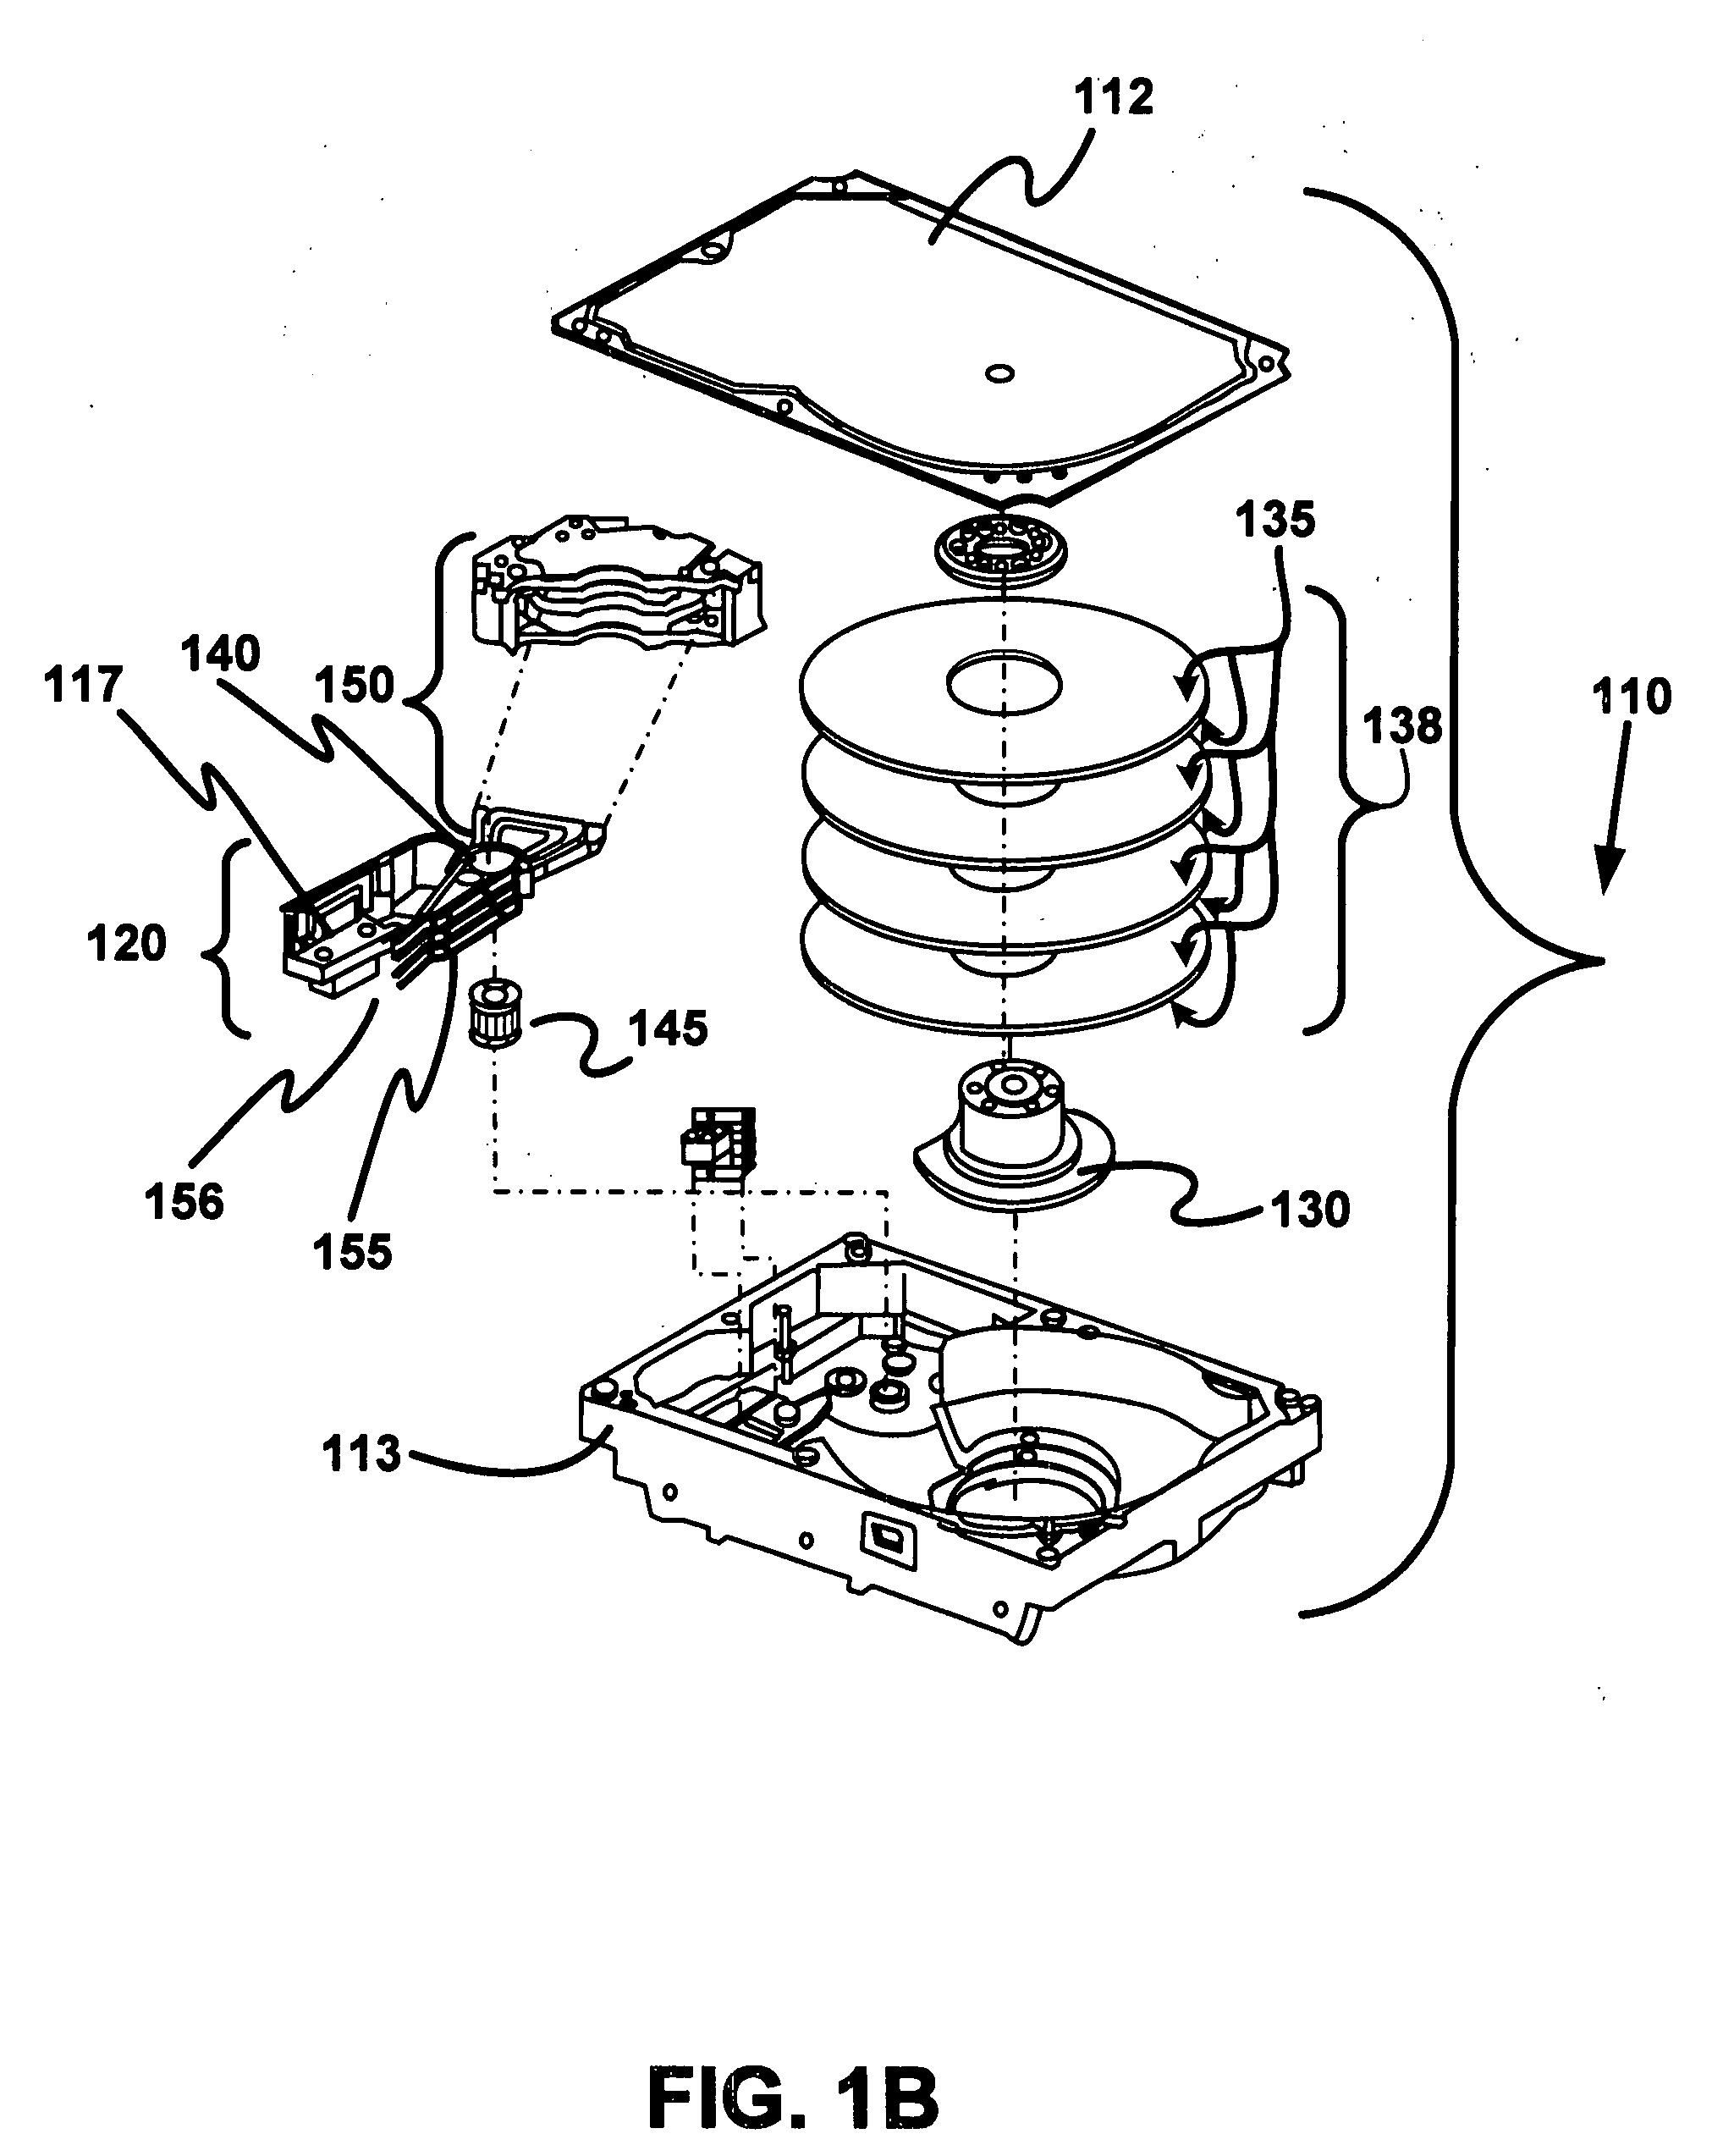 Outer actuator arm constrained layer dampers